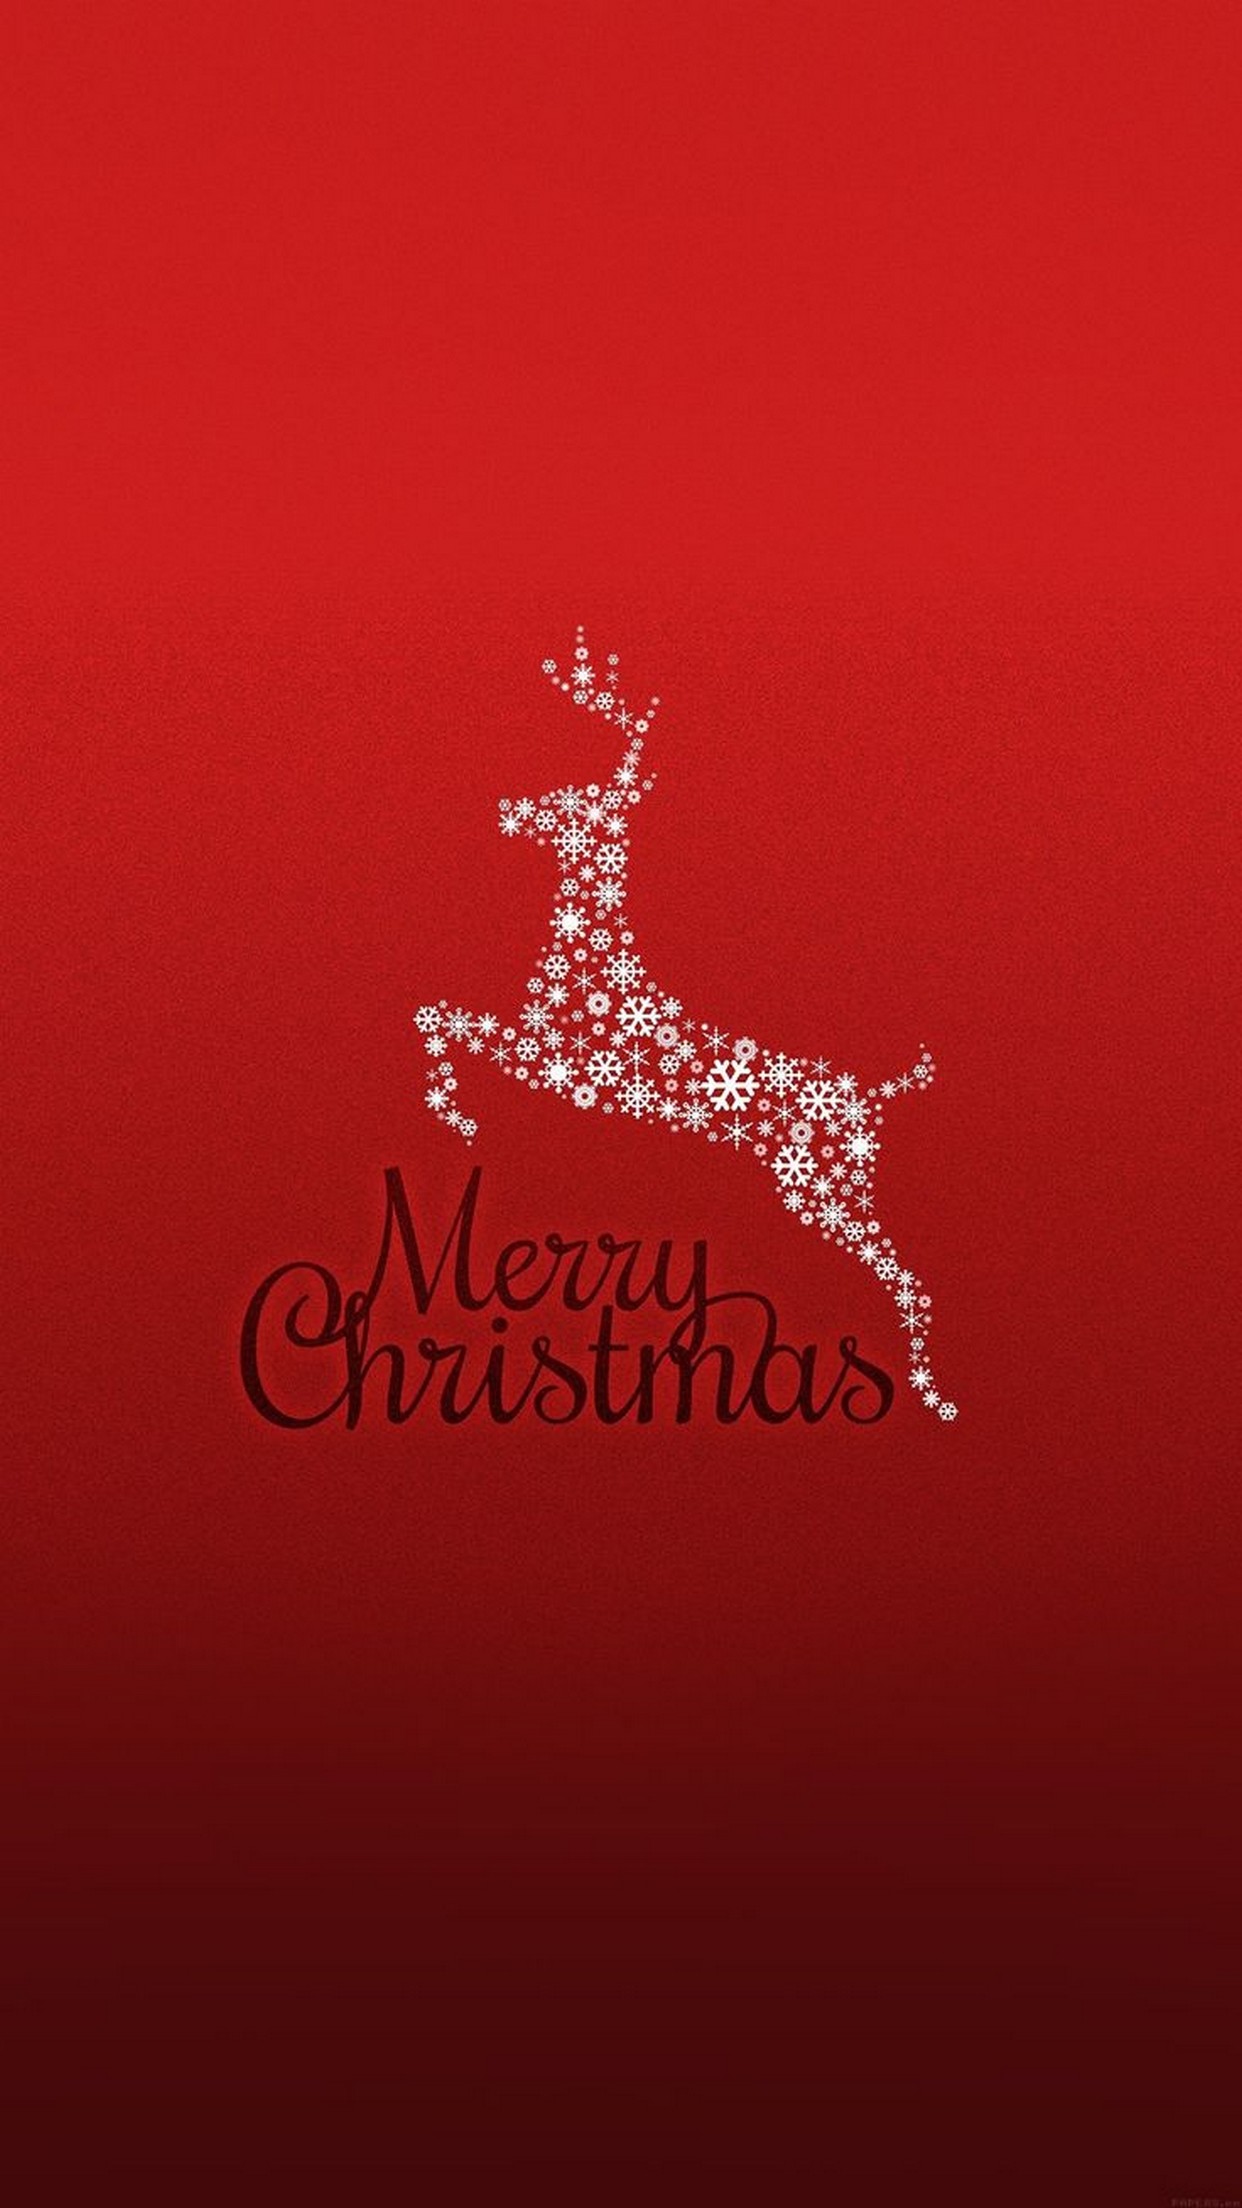 1242x2208 Rudolph Wallpapers Backgrounds Images Best rudolph